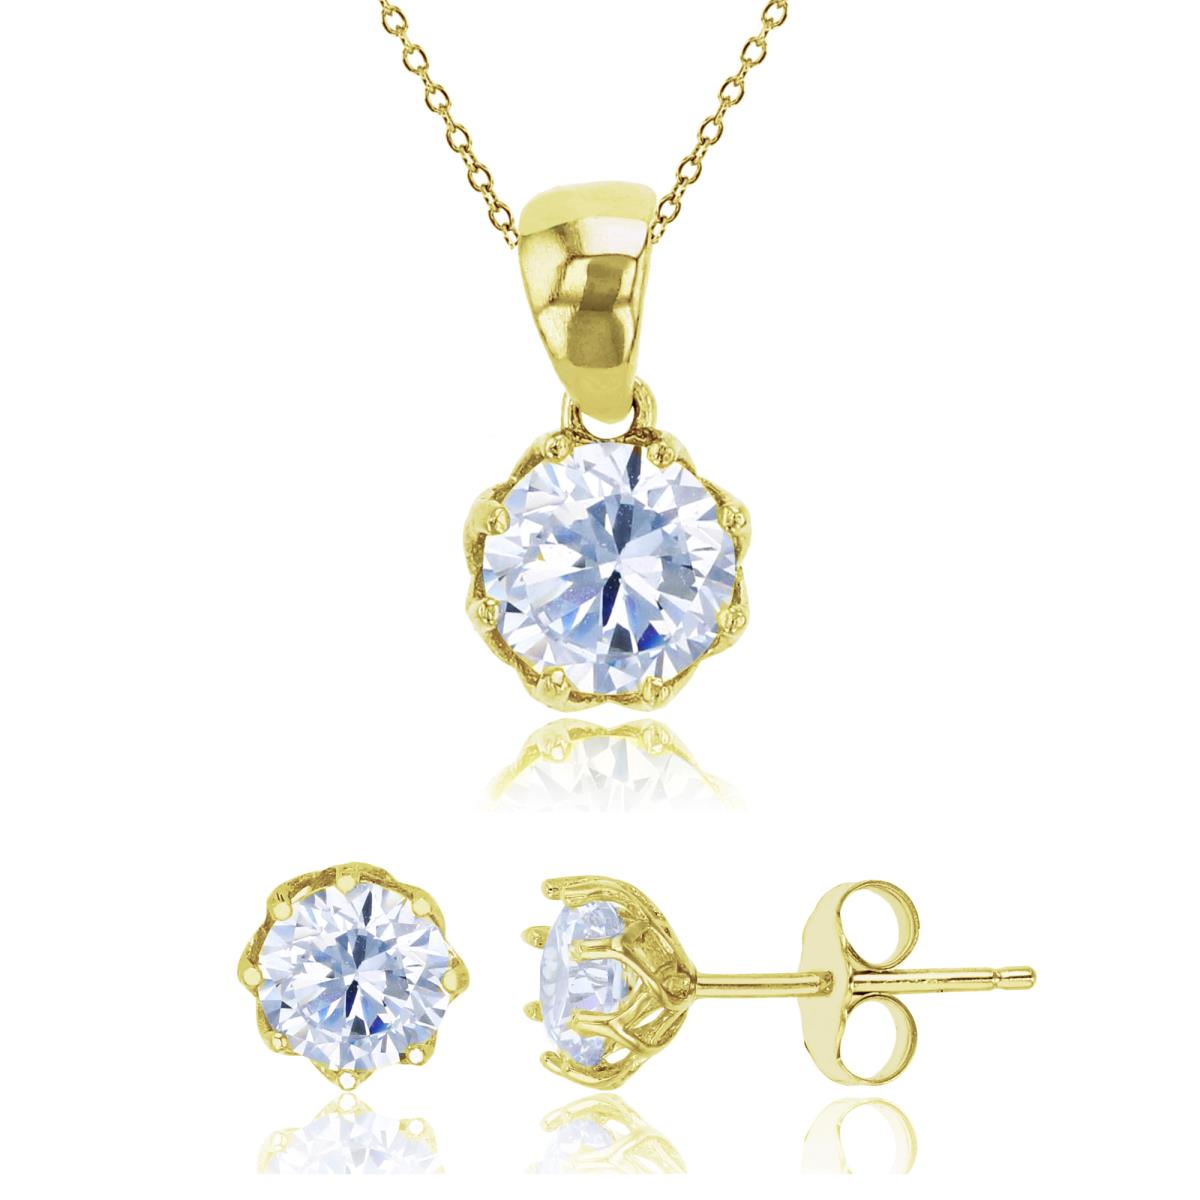 Sterling Silver Yellow 6mm White Round Cut CZ Solitaire Dangling 18" Necklace & Earring Set